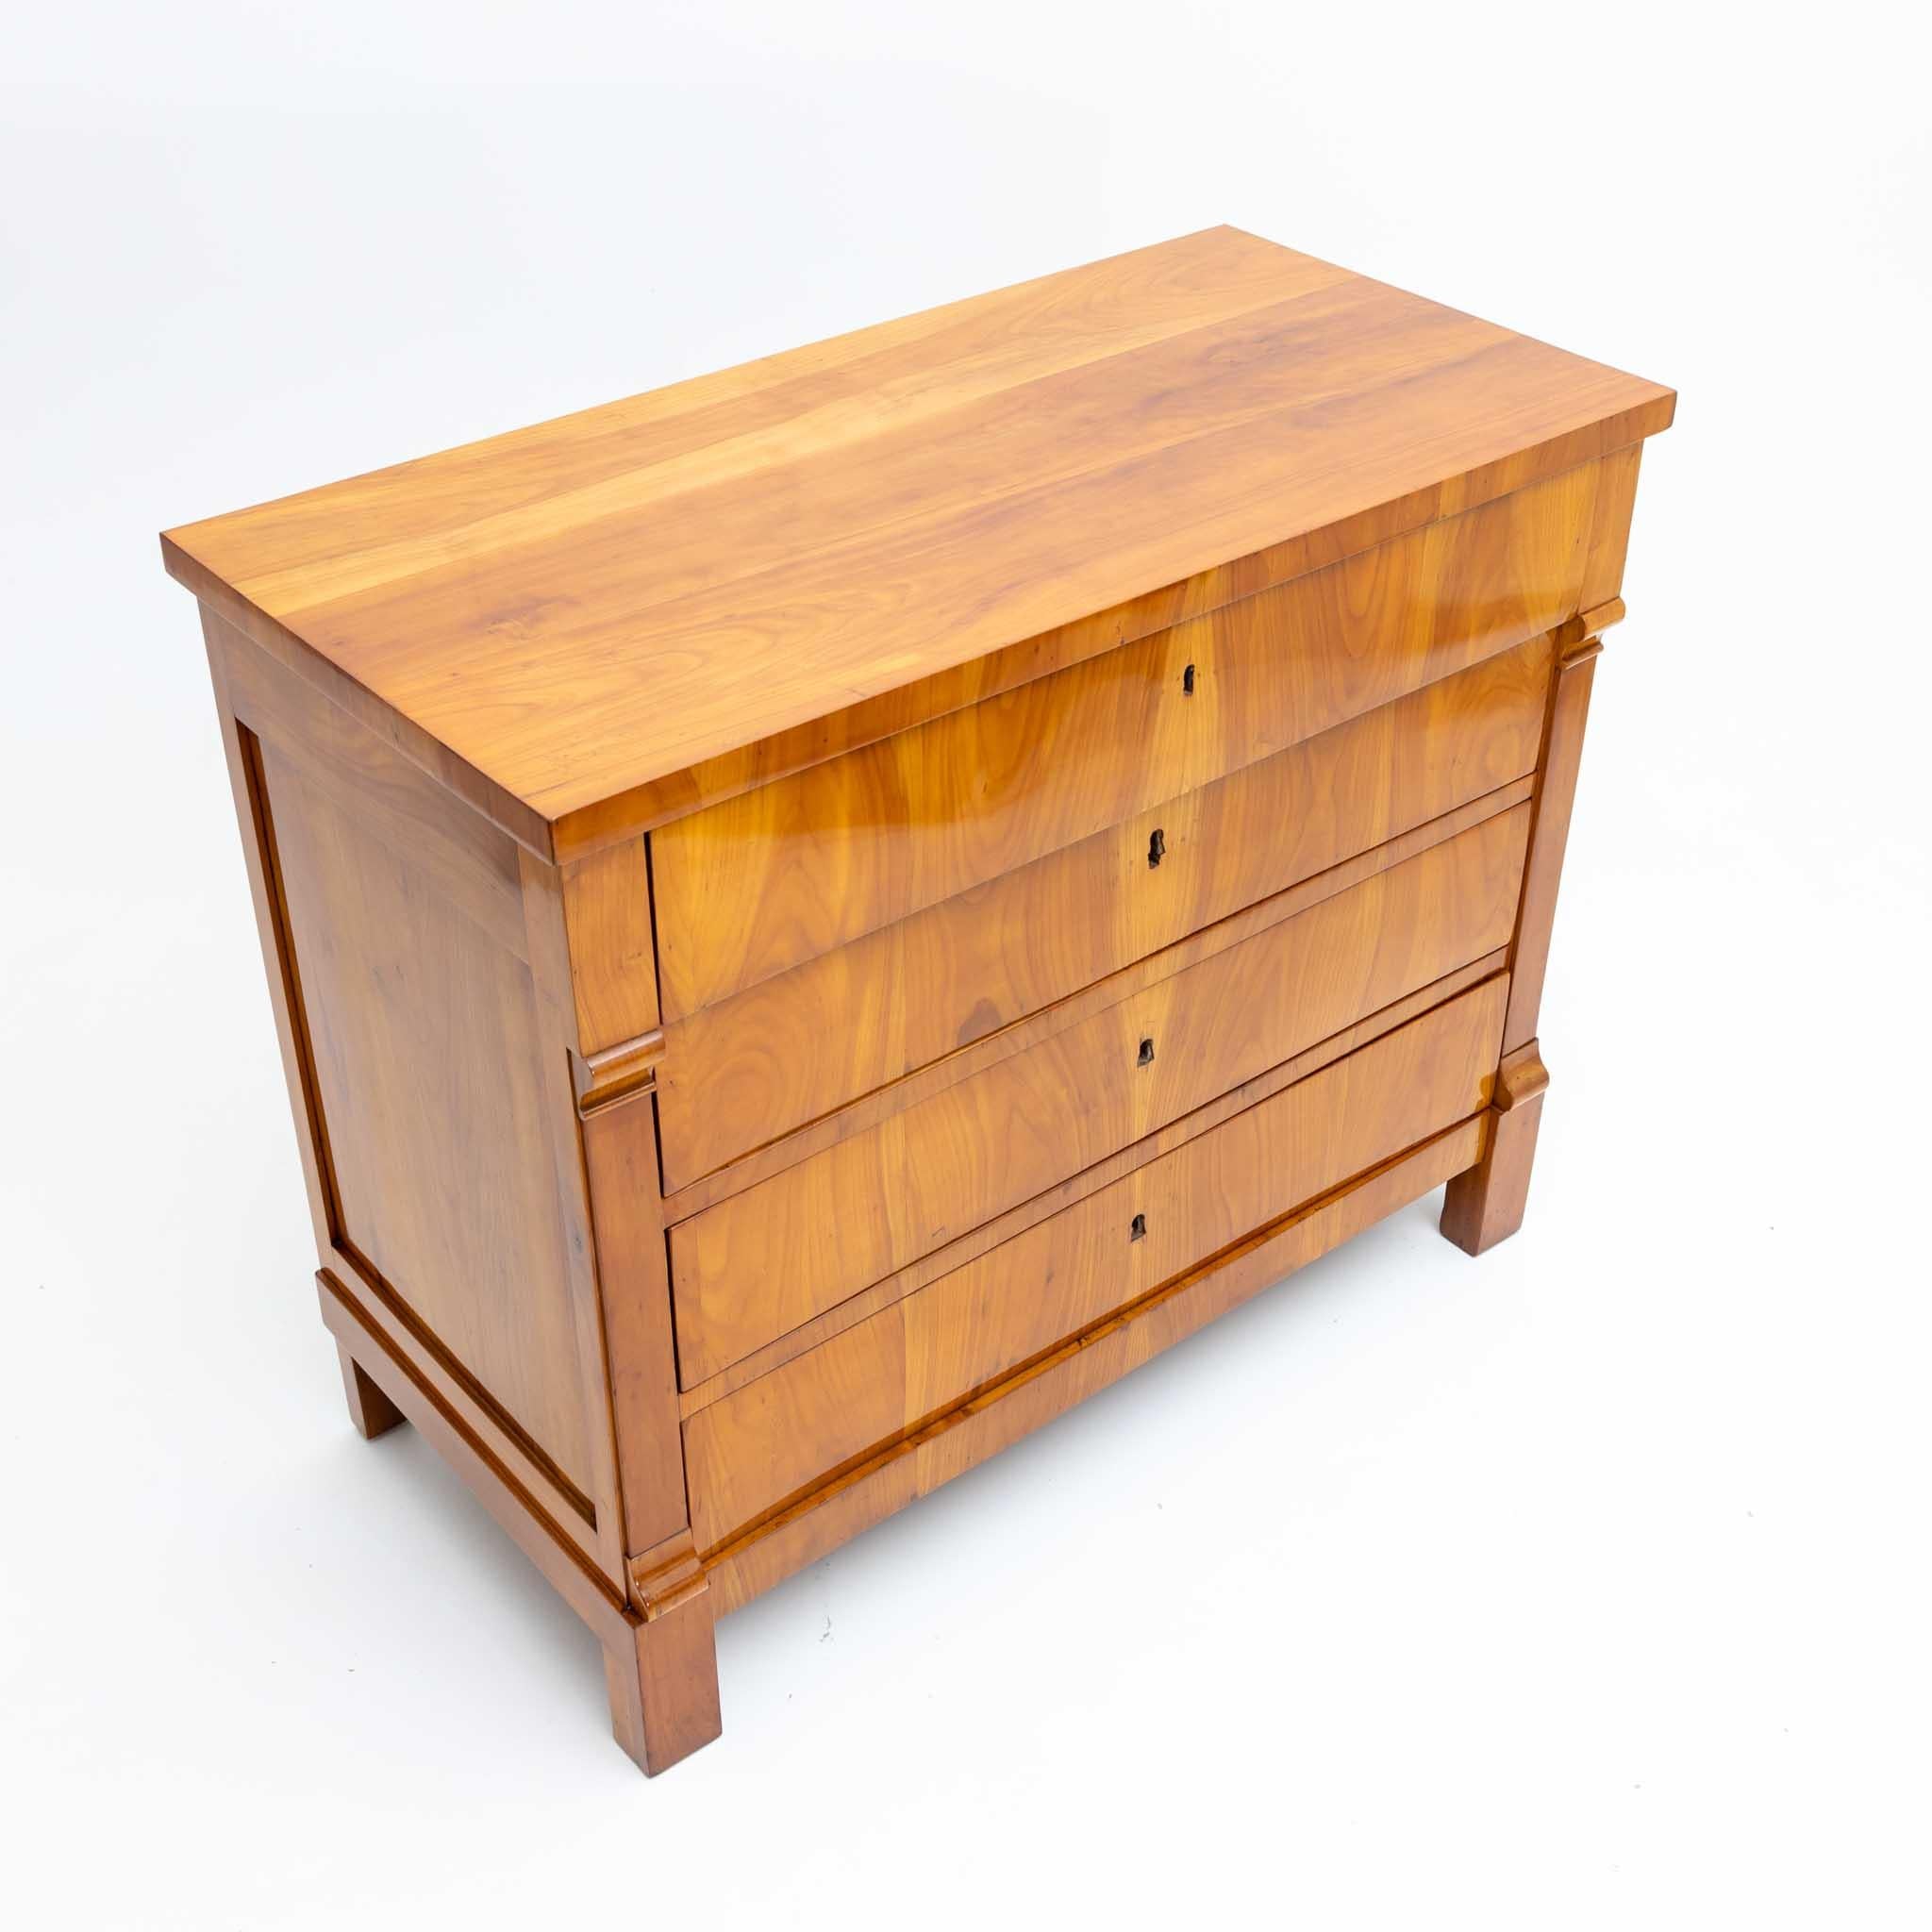 Biedermeier chest with four drawers and indicated pilasters on the corners. The top drawer protrudes slightly and the sides of the corpus are coffered. The chest stands on straight square legs and is veneered in cherry. It has been professionally